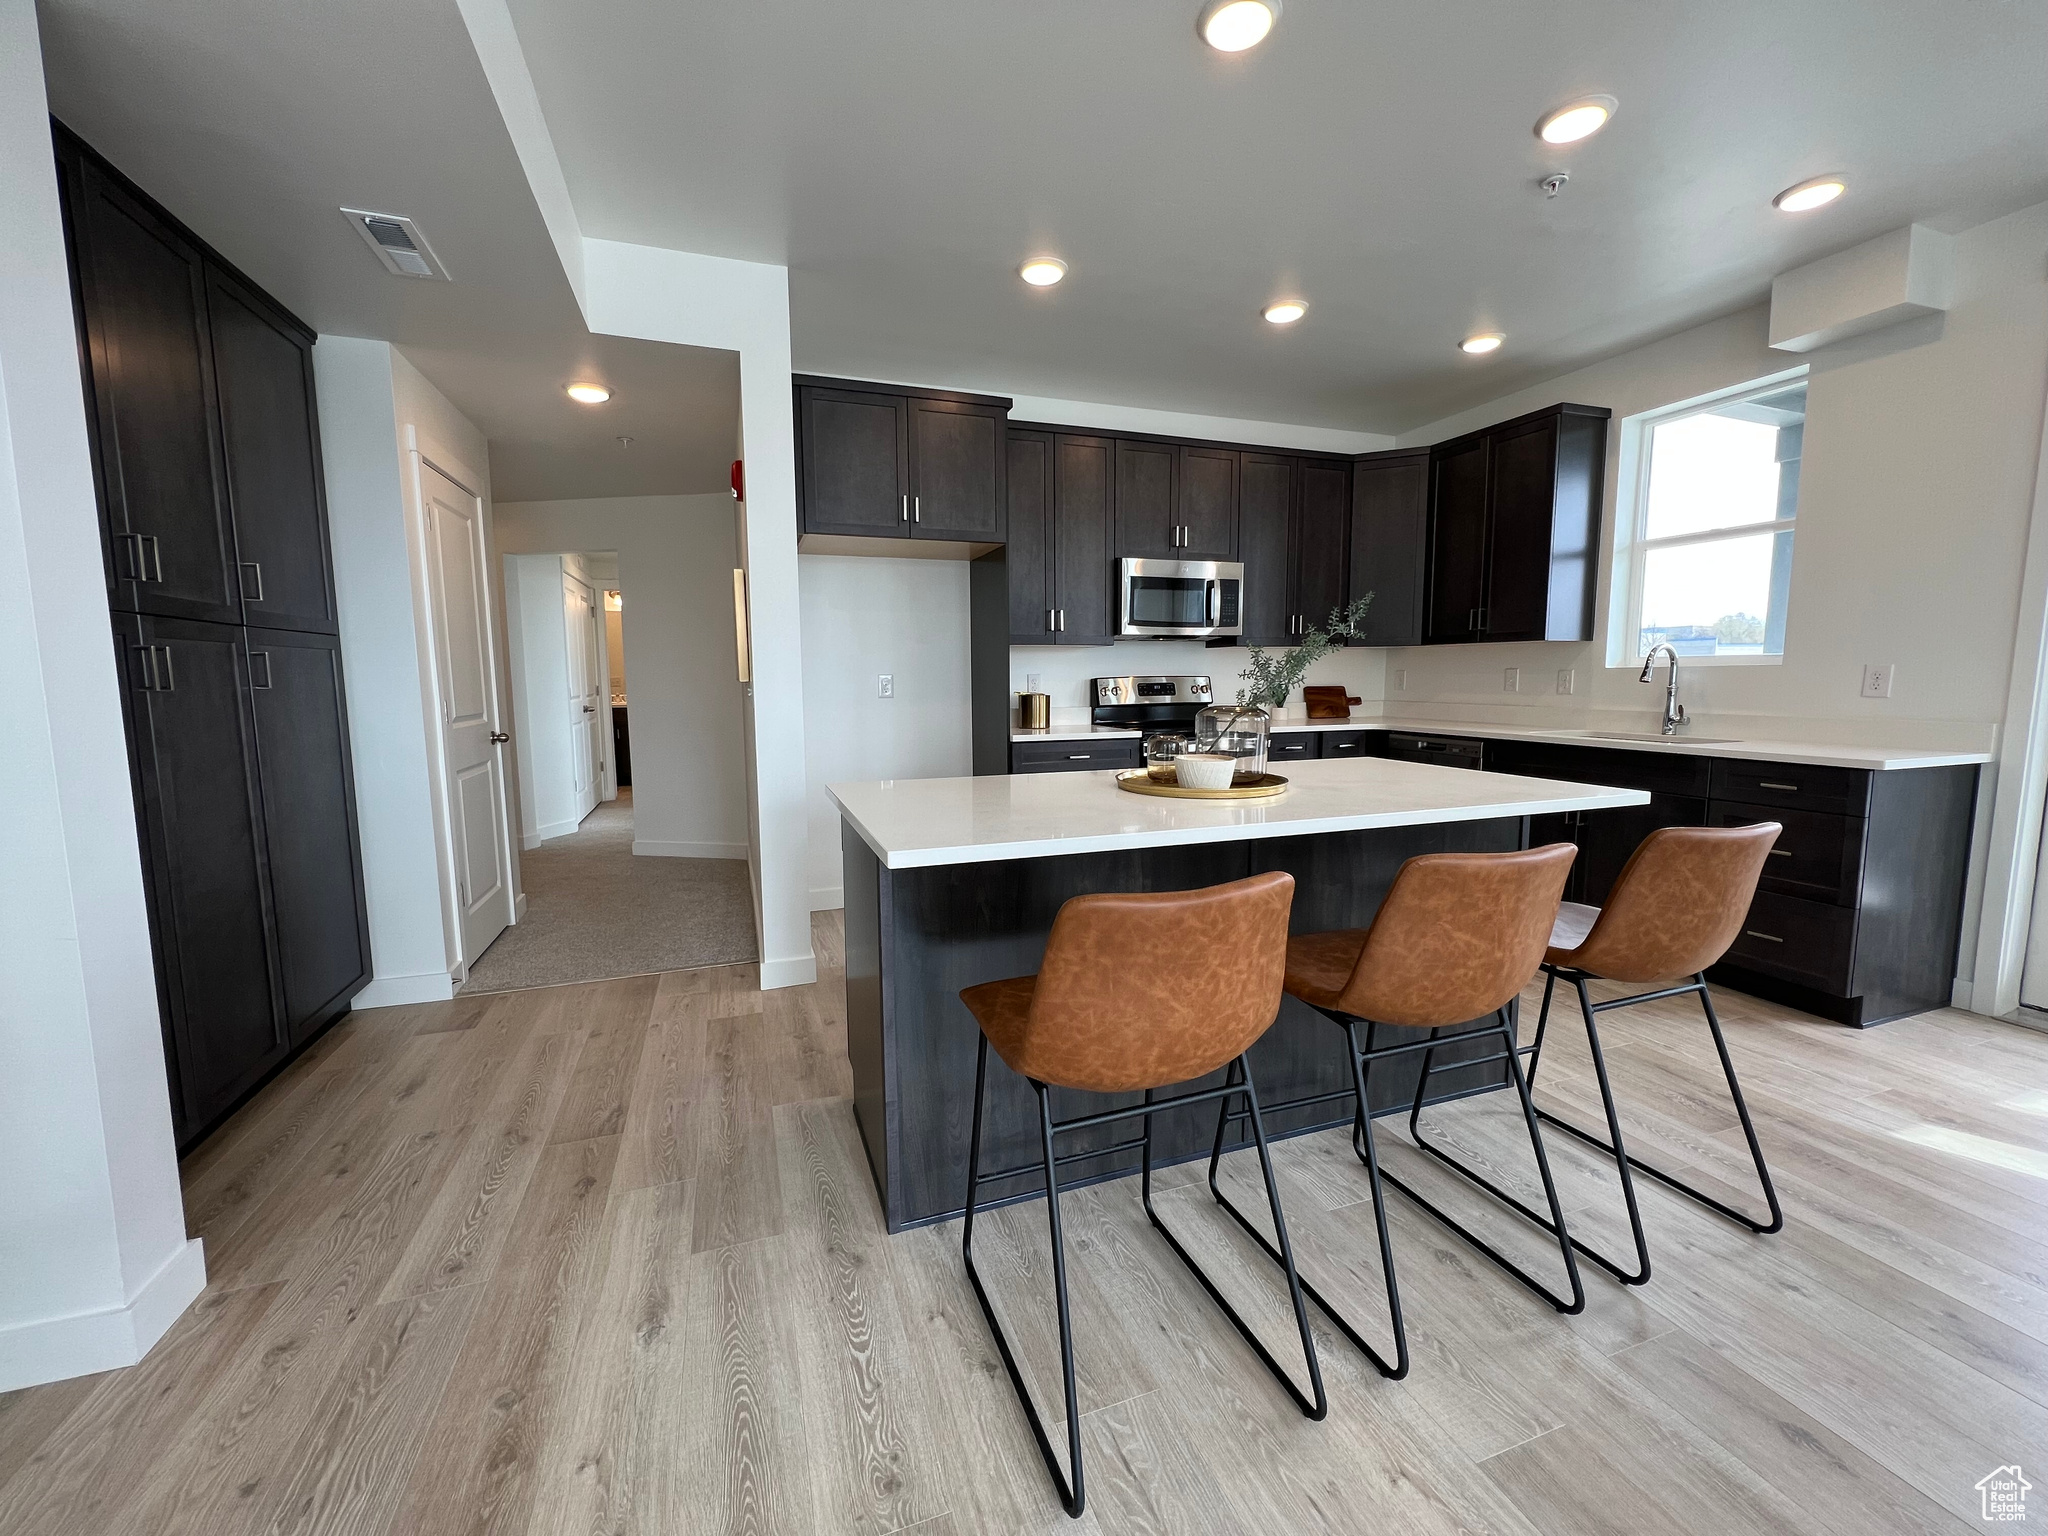 Kitchen featuring a breakfast bar area, stainless steel appliances, light hardwood / wood-style floors, sink, and a center island